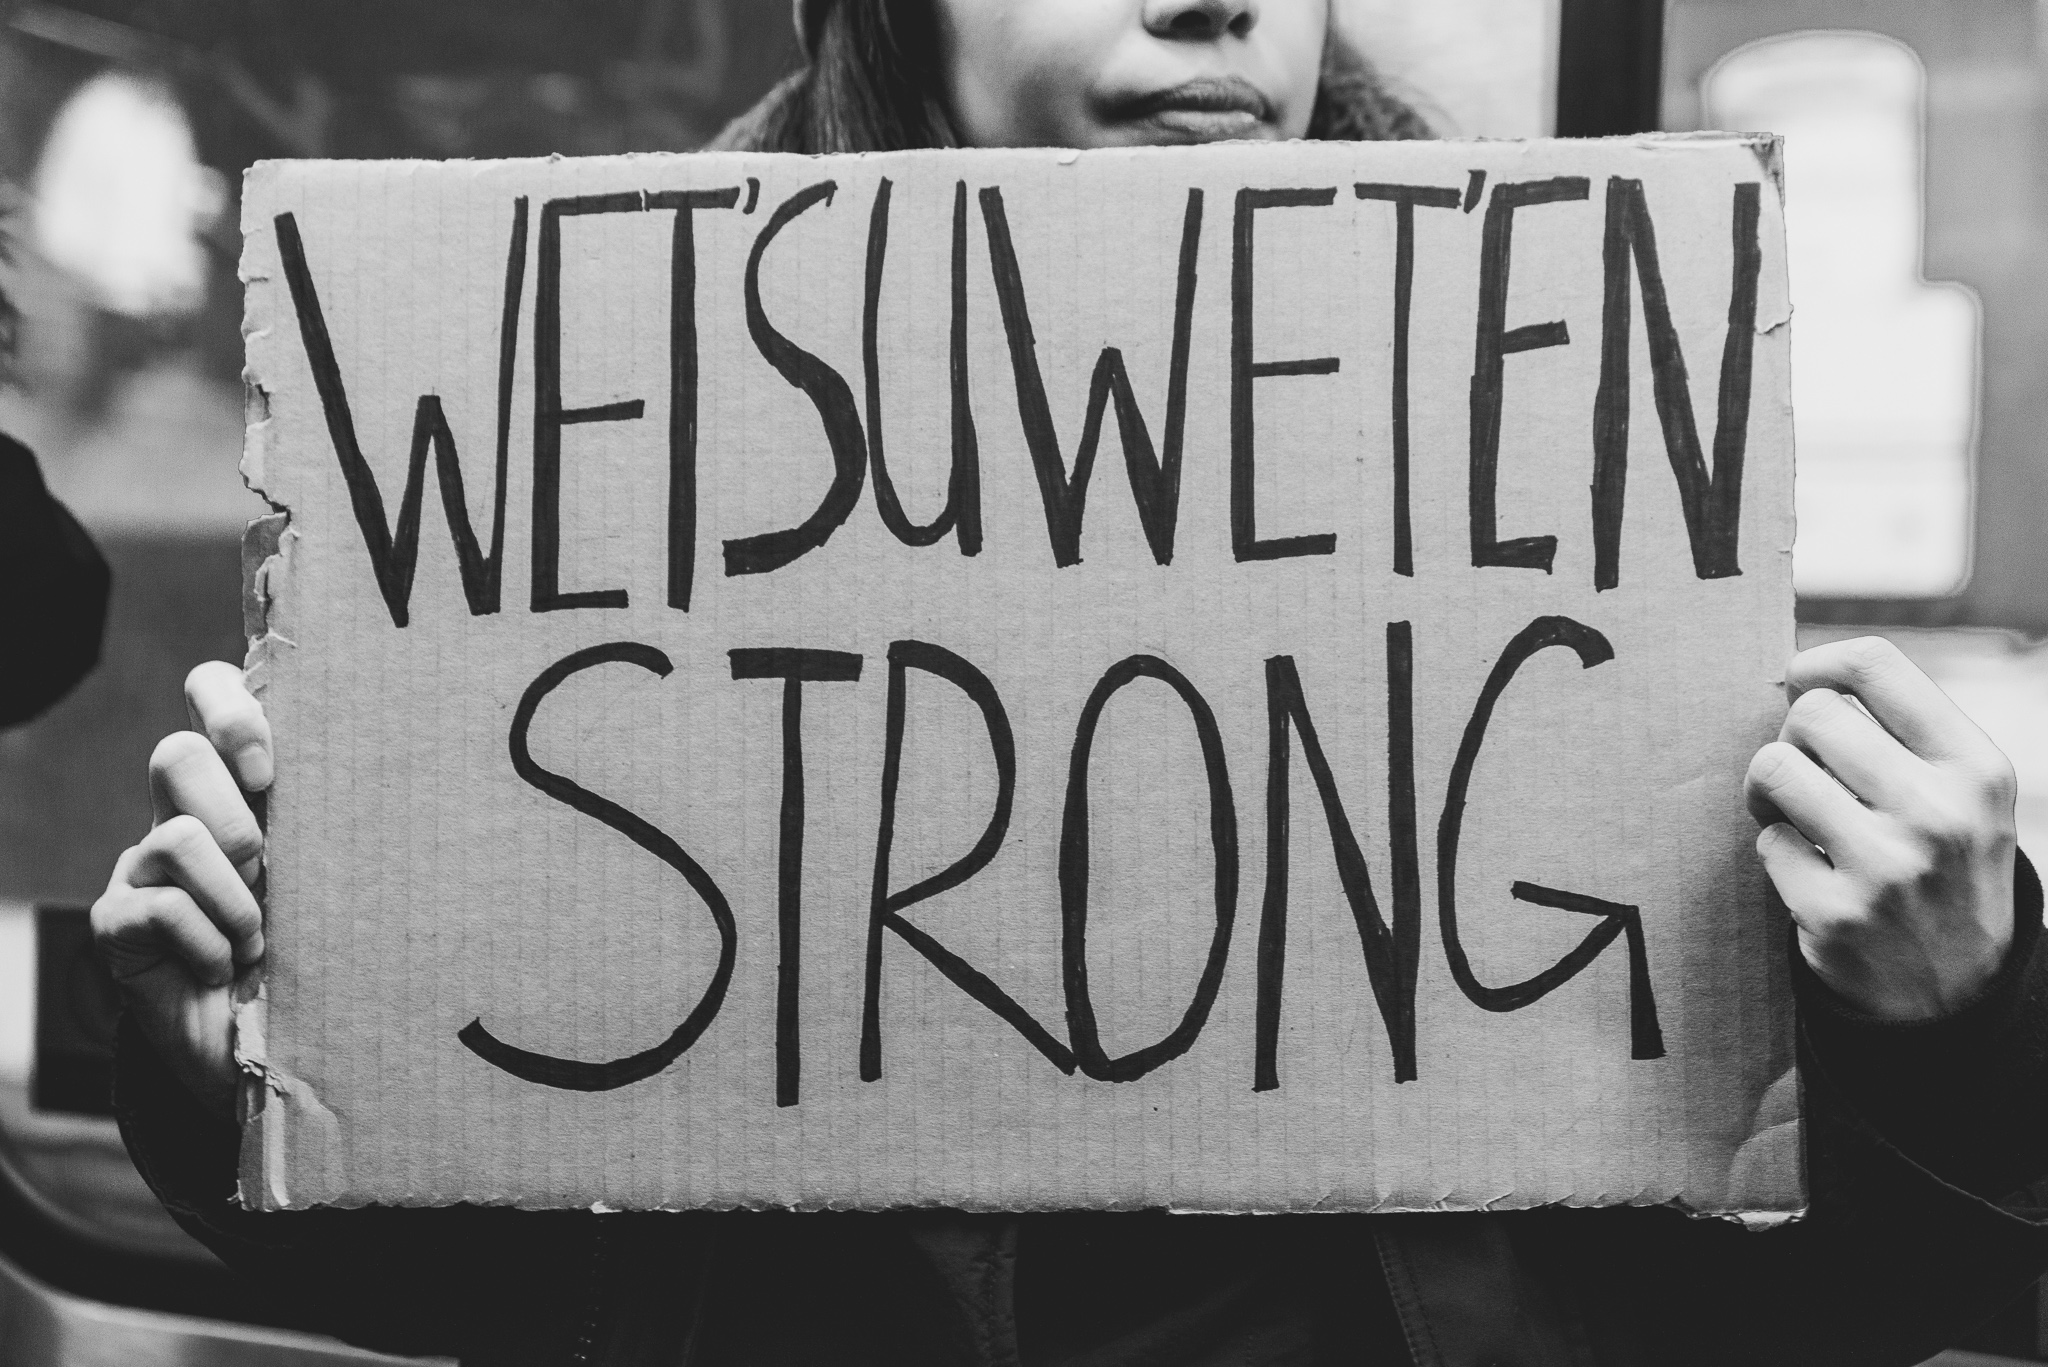 A woman holding a cardboard sign with 'Wetsuweten Strong' written on it in big letters.